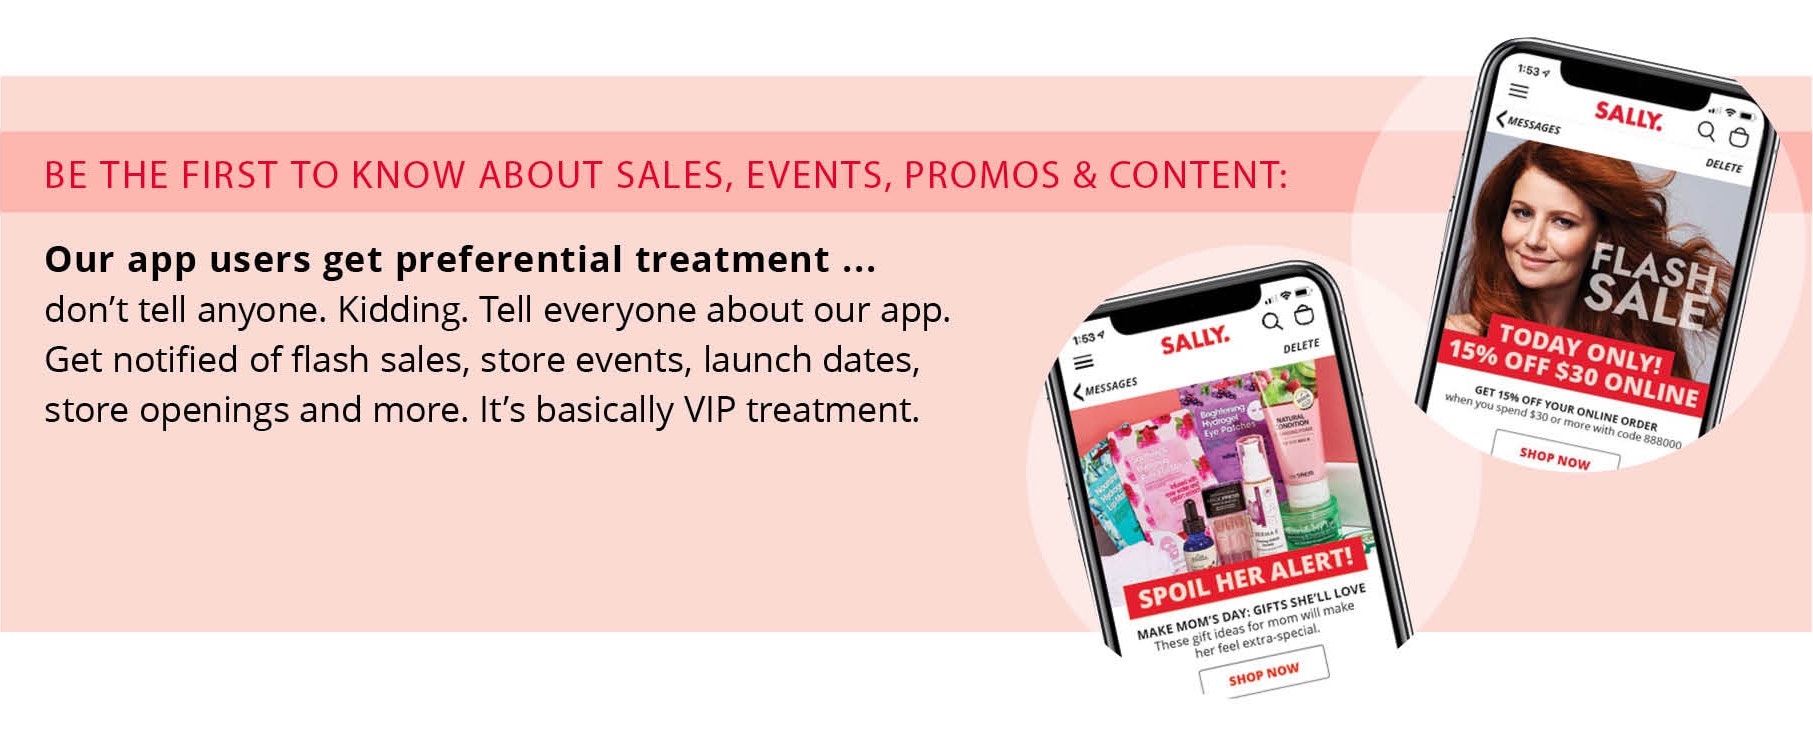 Be the first to know about sales, events, promos, and content: Our app users get preferential treatment...don't tell anyone. Kidding. Tell everyone about our app. Get notified of flash sales, store events, launch dates, store openings and more. It's basically VIP treatment.